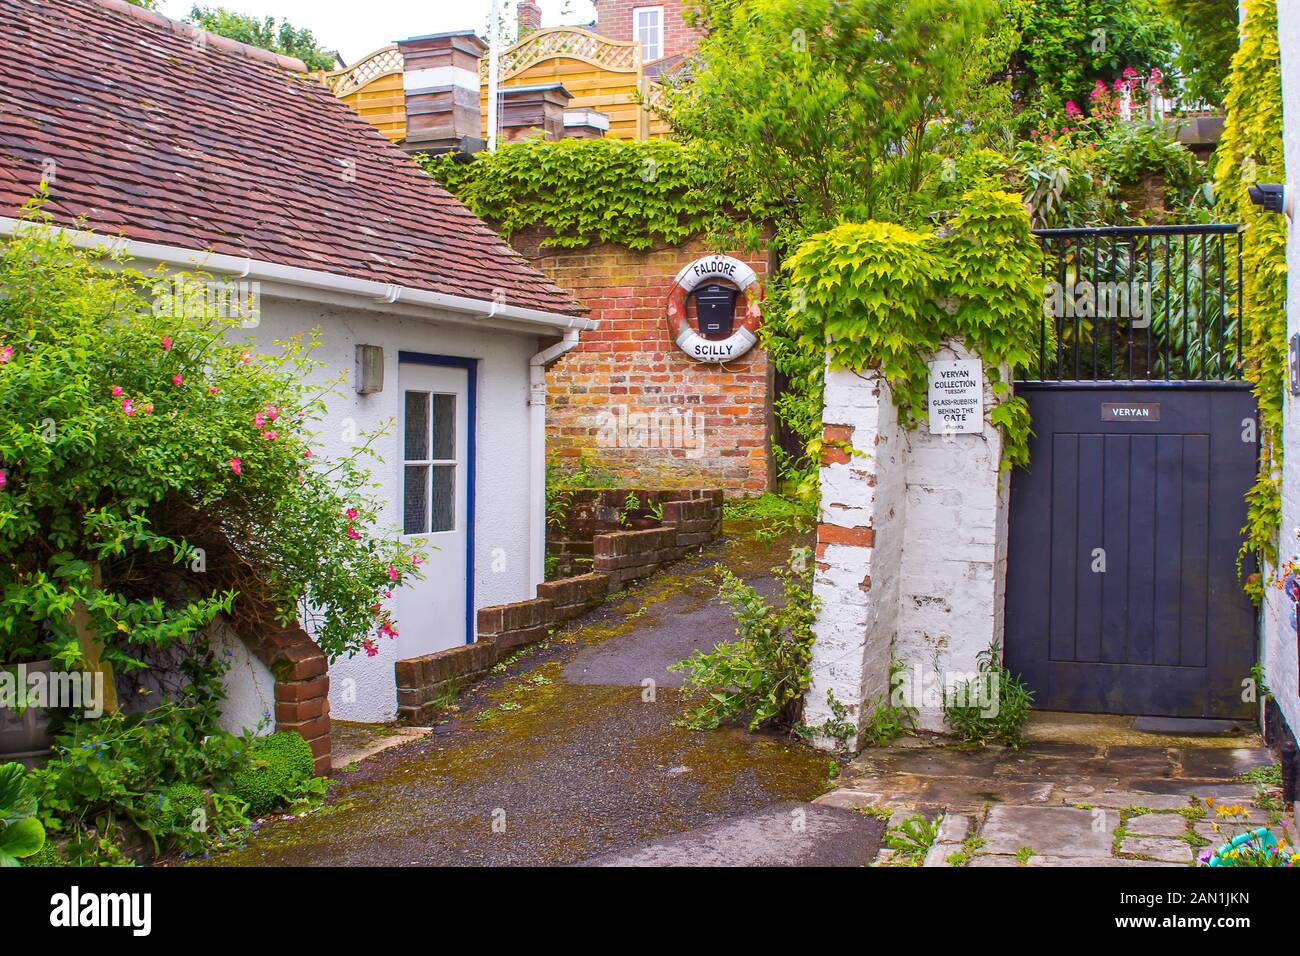 8 June 2017 A secluded corner with a cottage and lush garden growth in Lymington on the south coast of England in early June Stock Photo